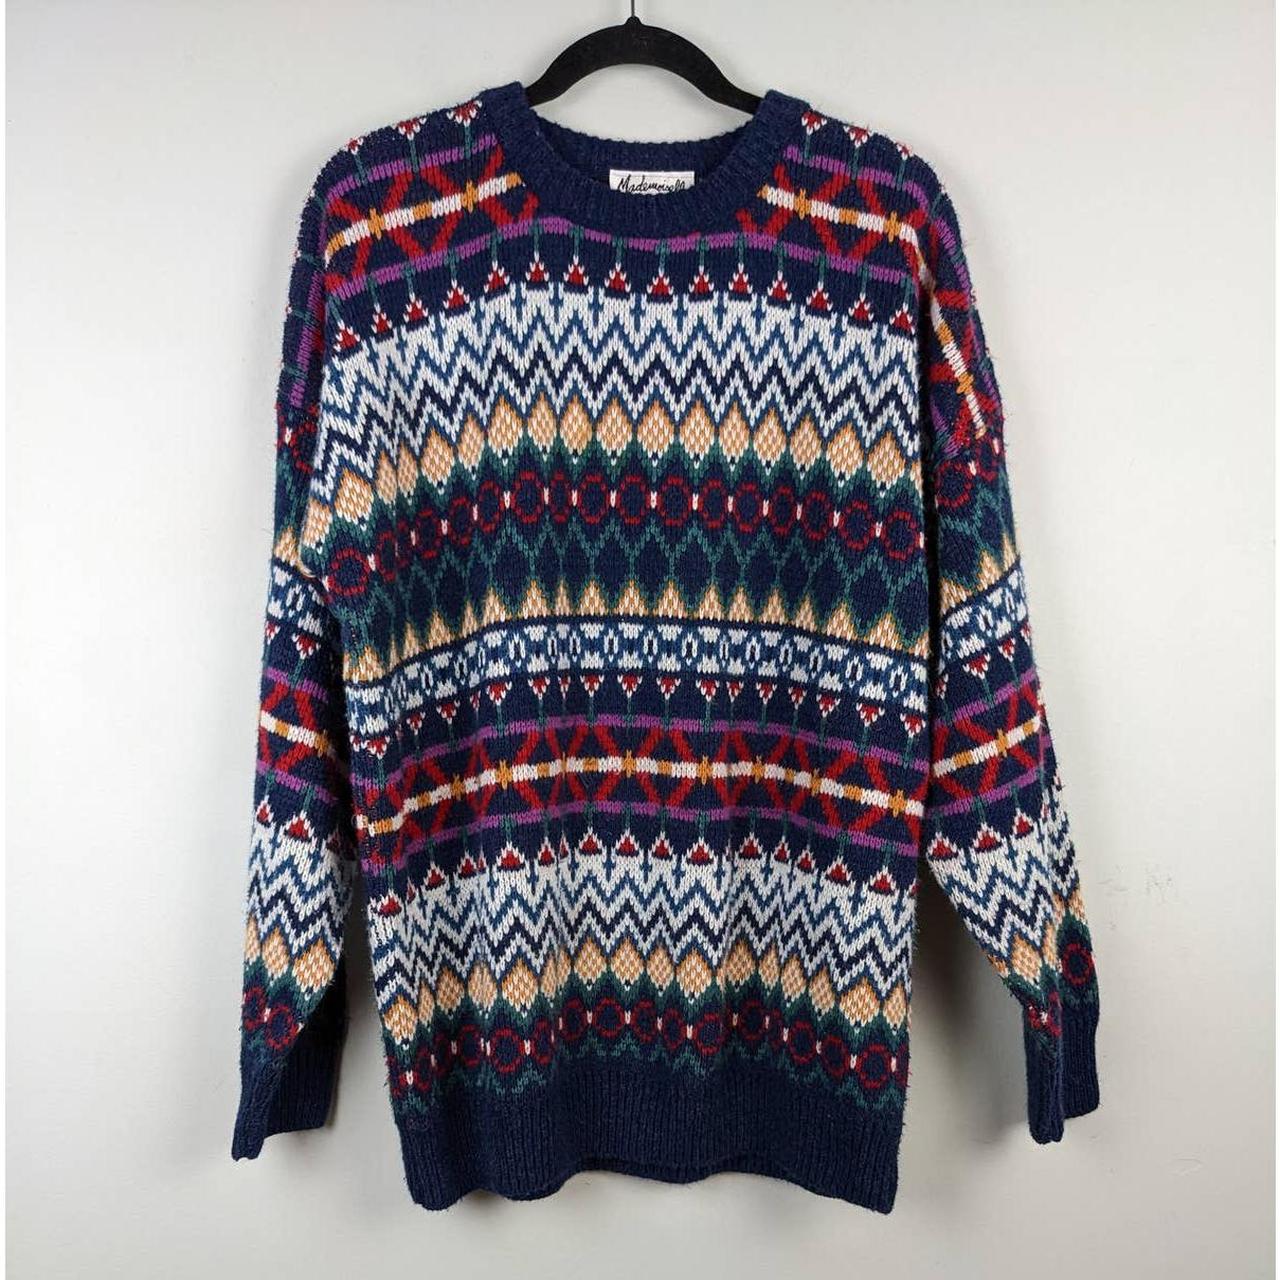 Vintage colorful fair isle sweater from the vintage... - Depop